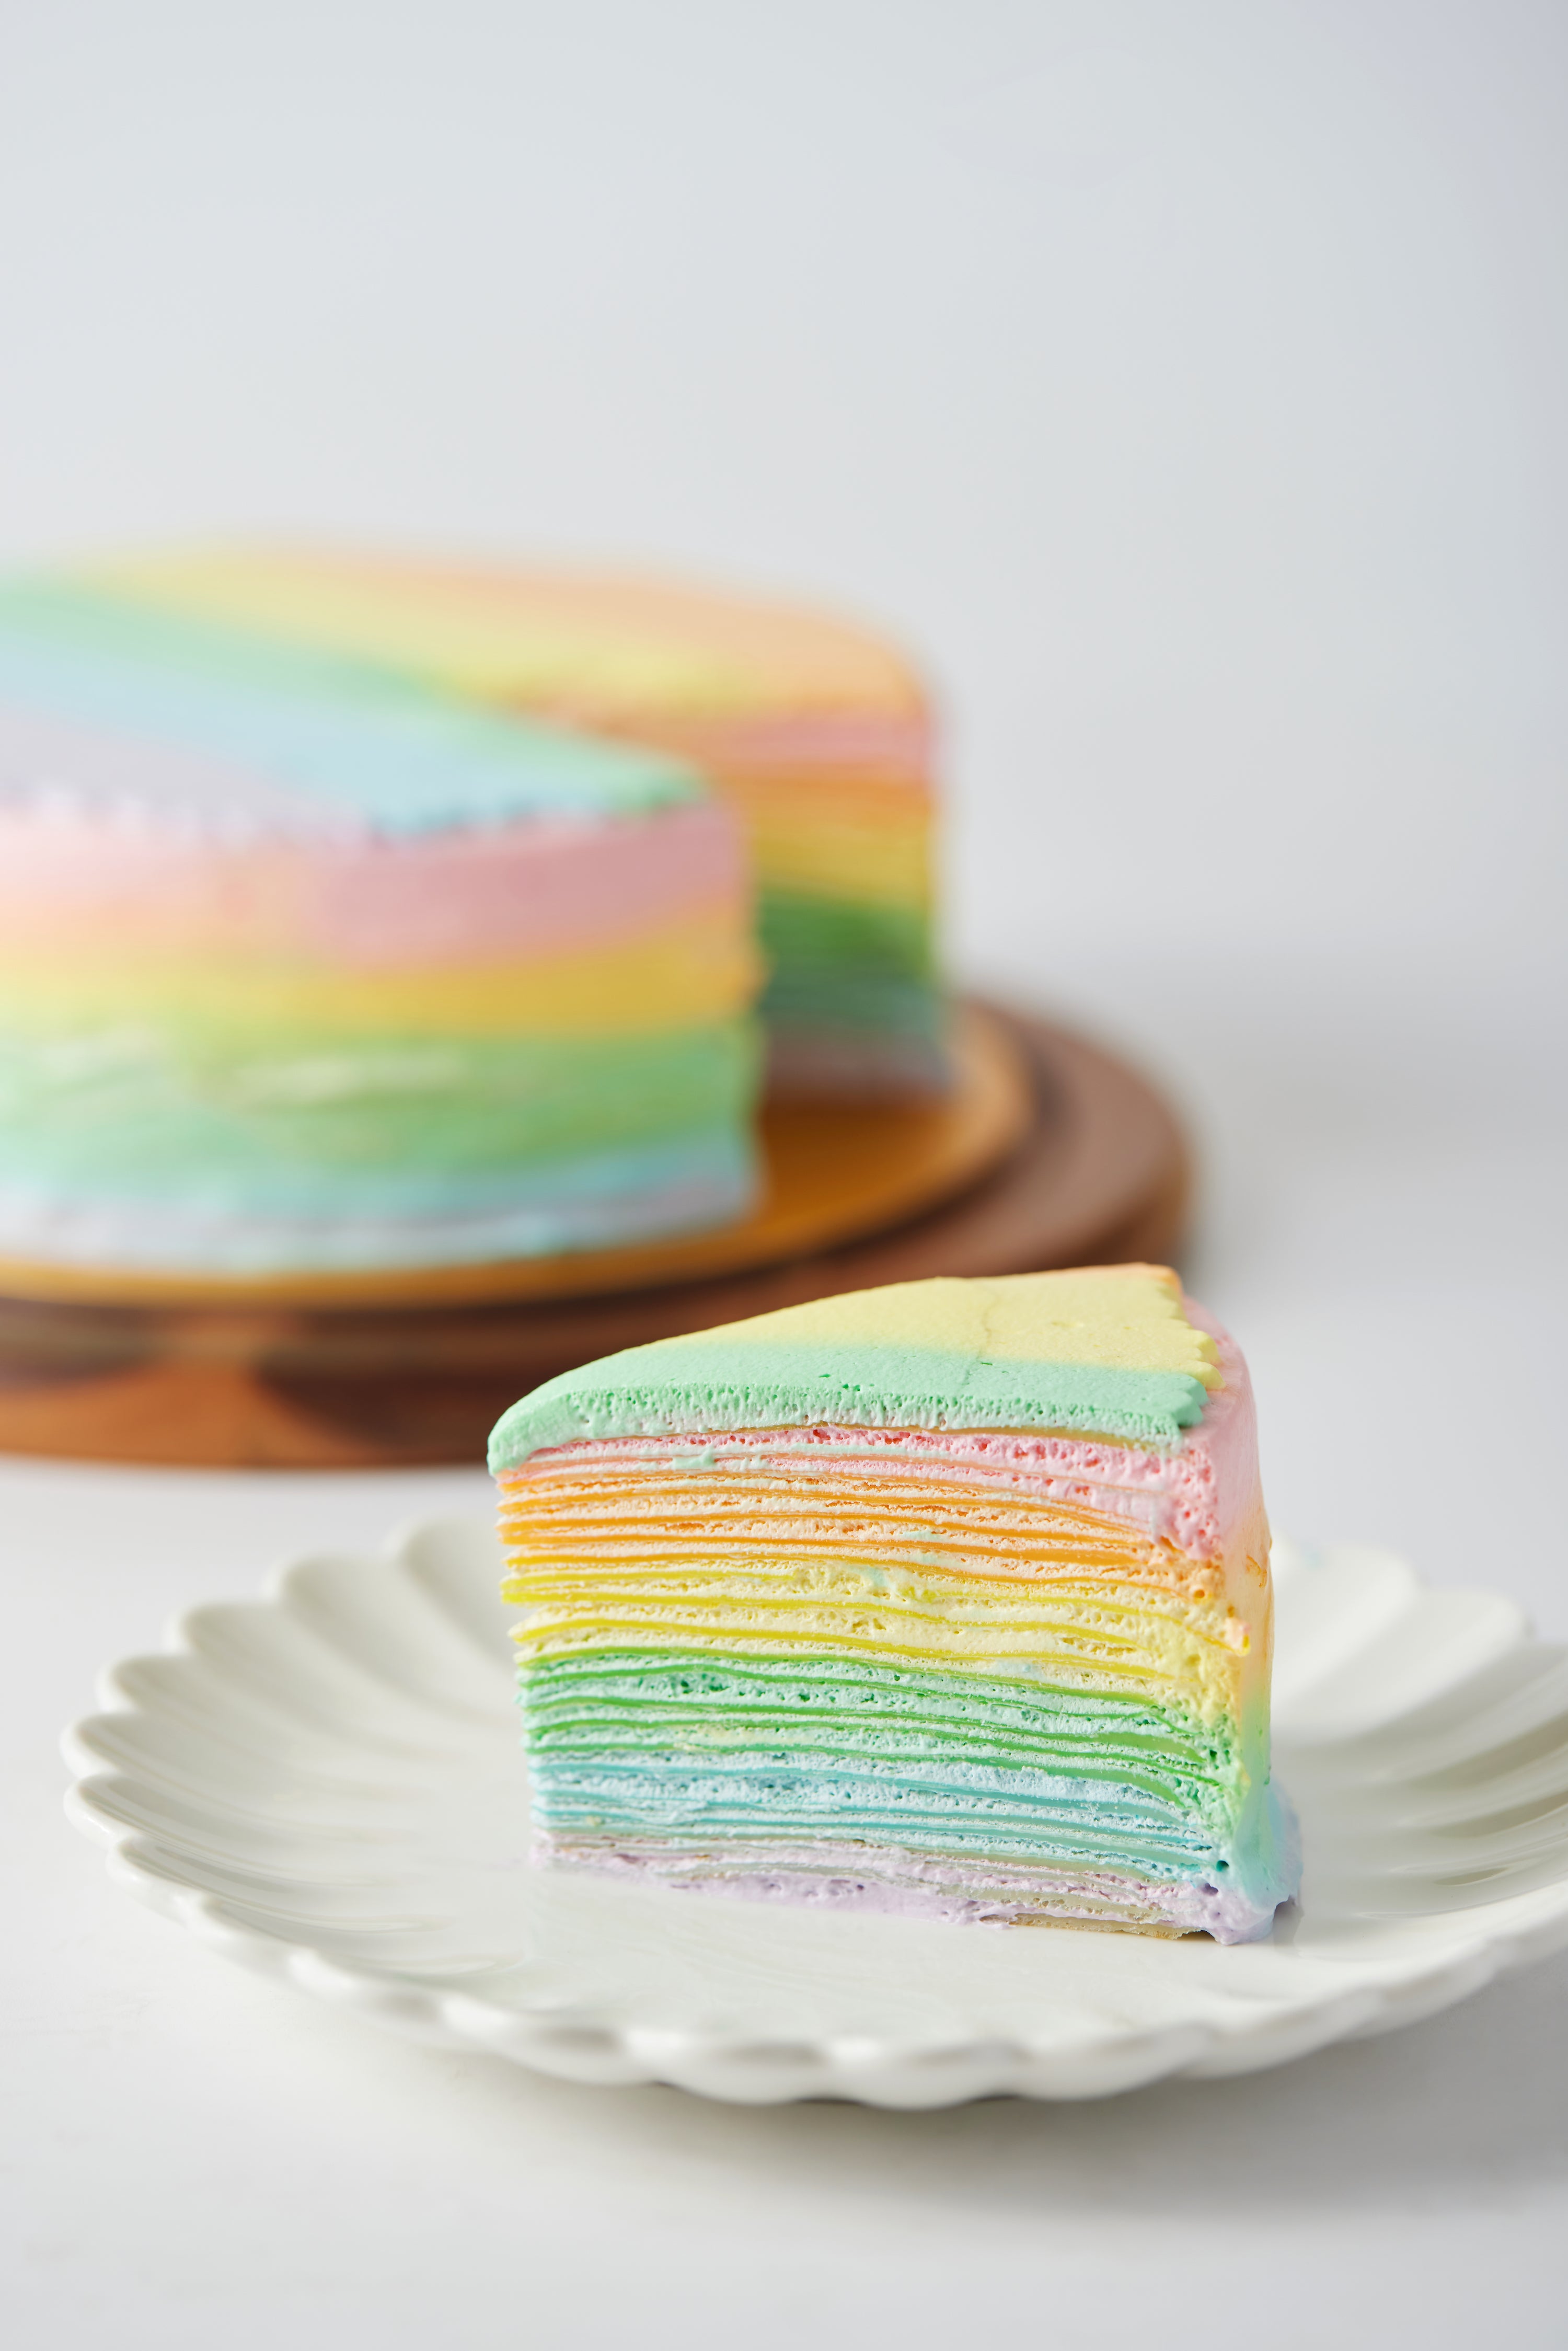 Mille Crepe Cake - Where to Find It & How to Make It - Glutto Digest